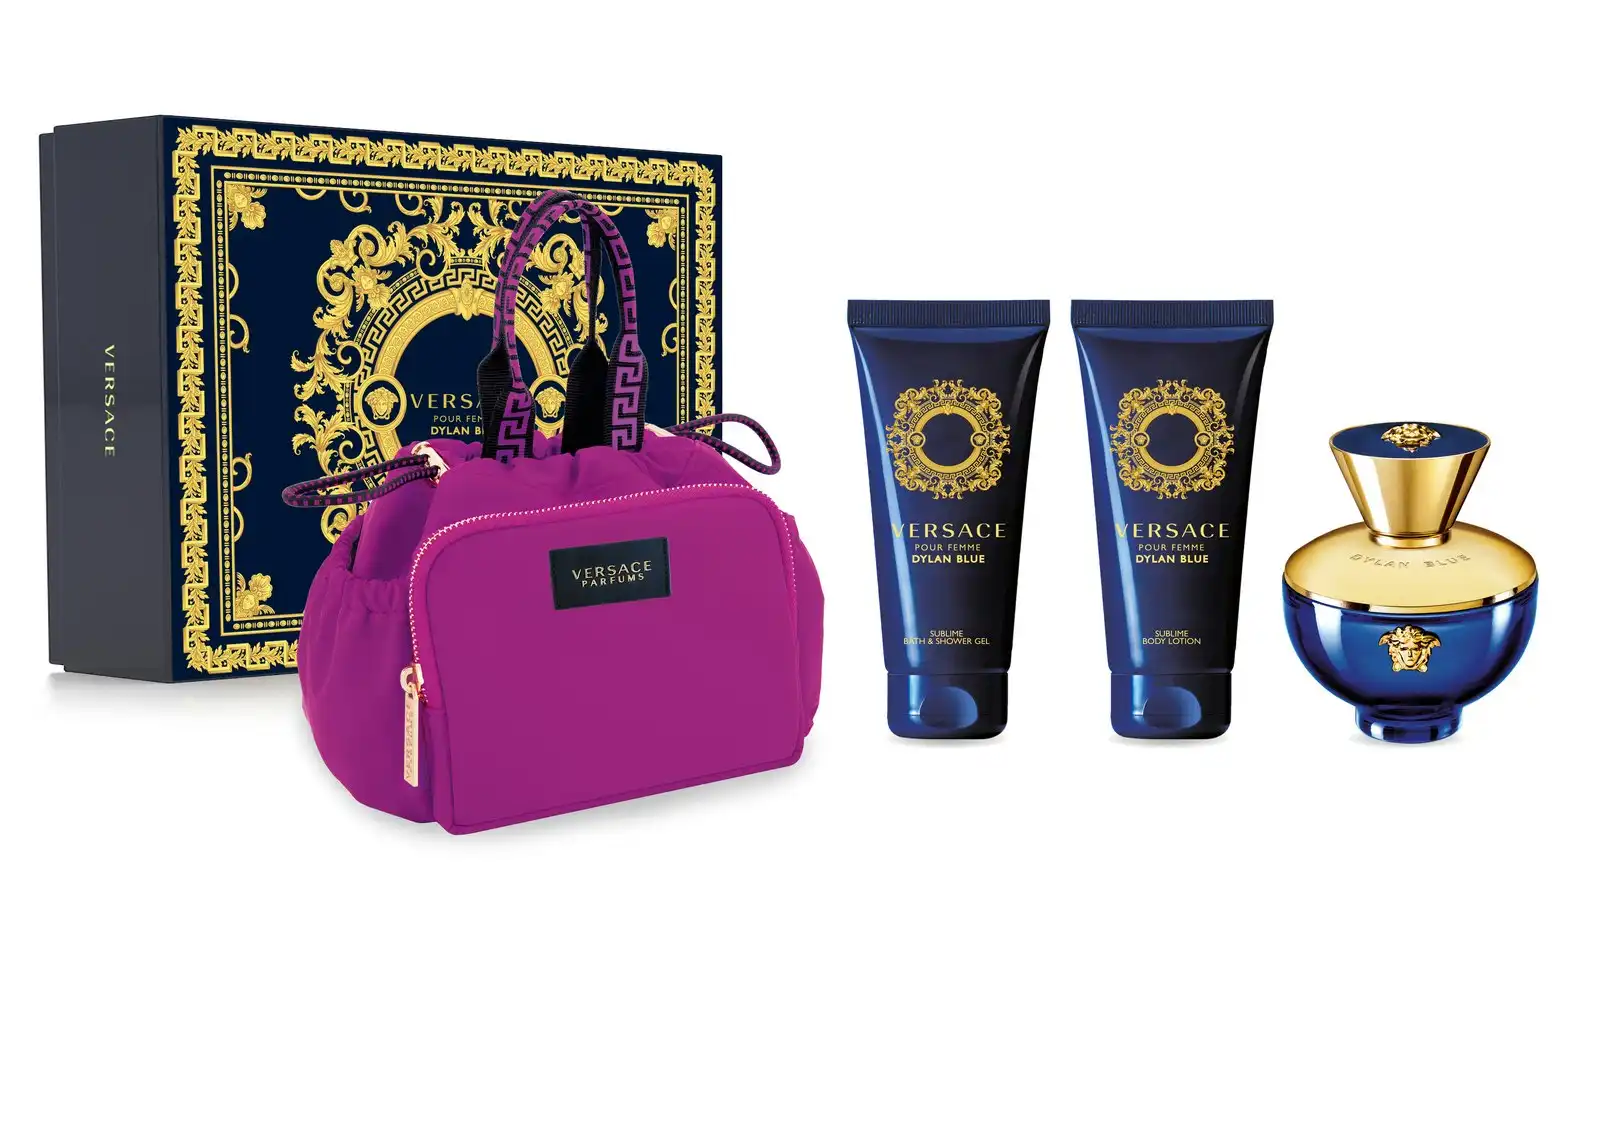 Versace Dylan Blue Pour Femme EDP 100ml 4 Piece Gift Set Limited Edition